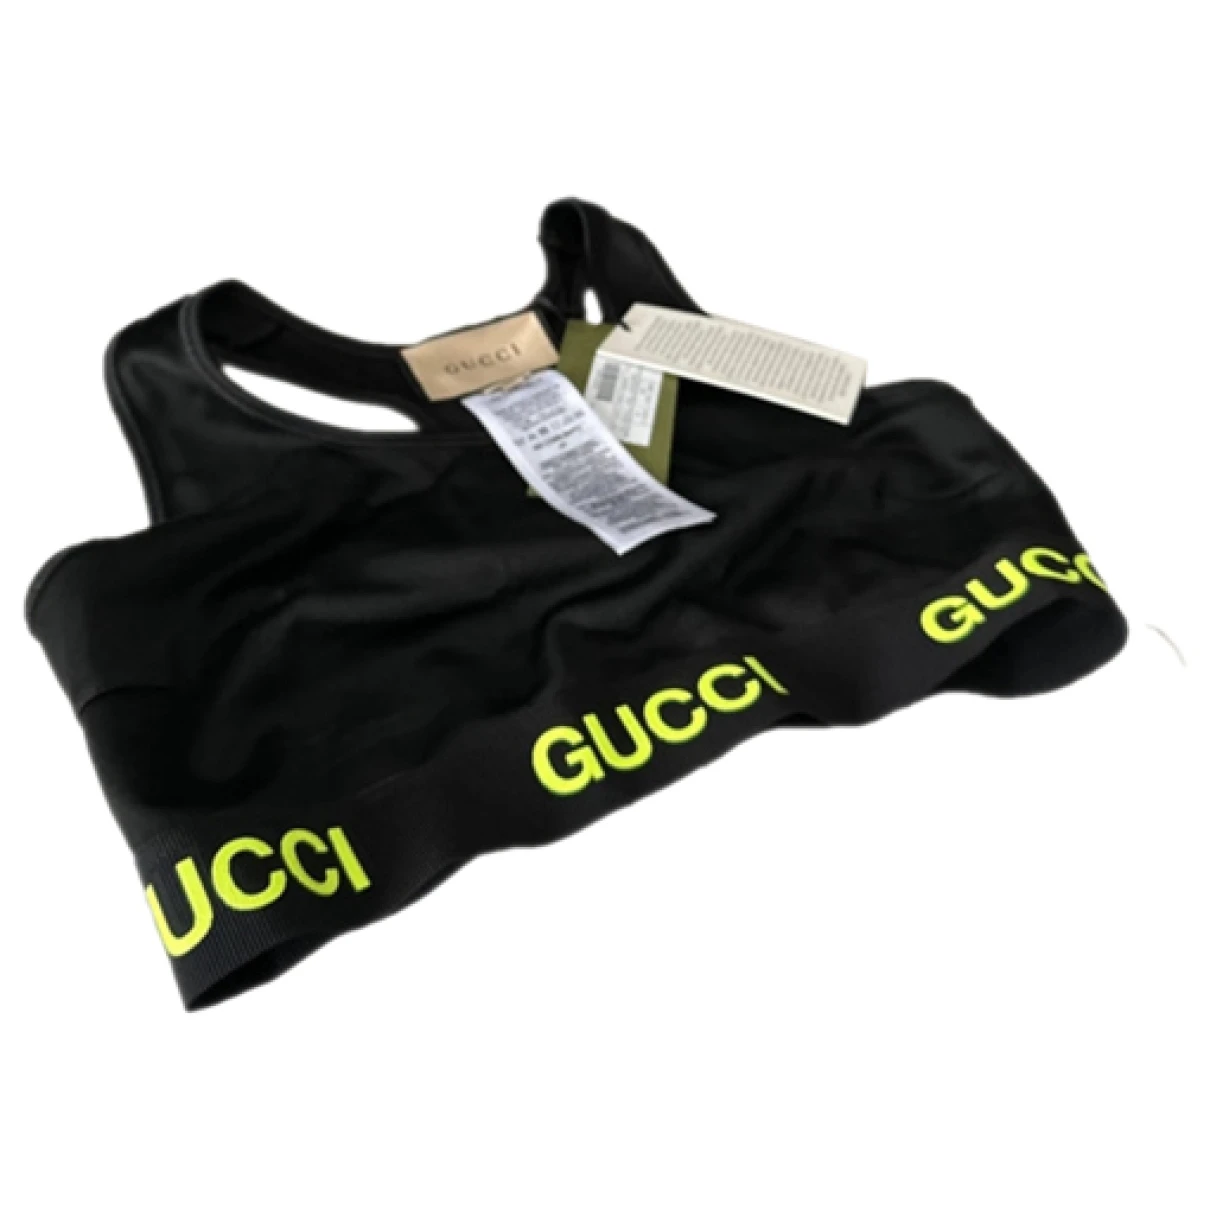 Pre-owned Gucci Camisole In Black